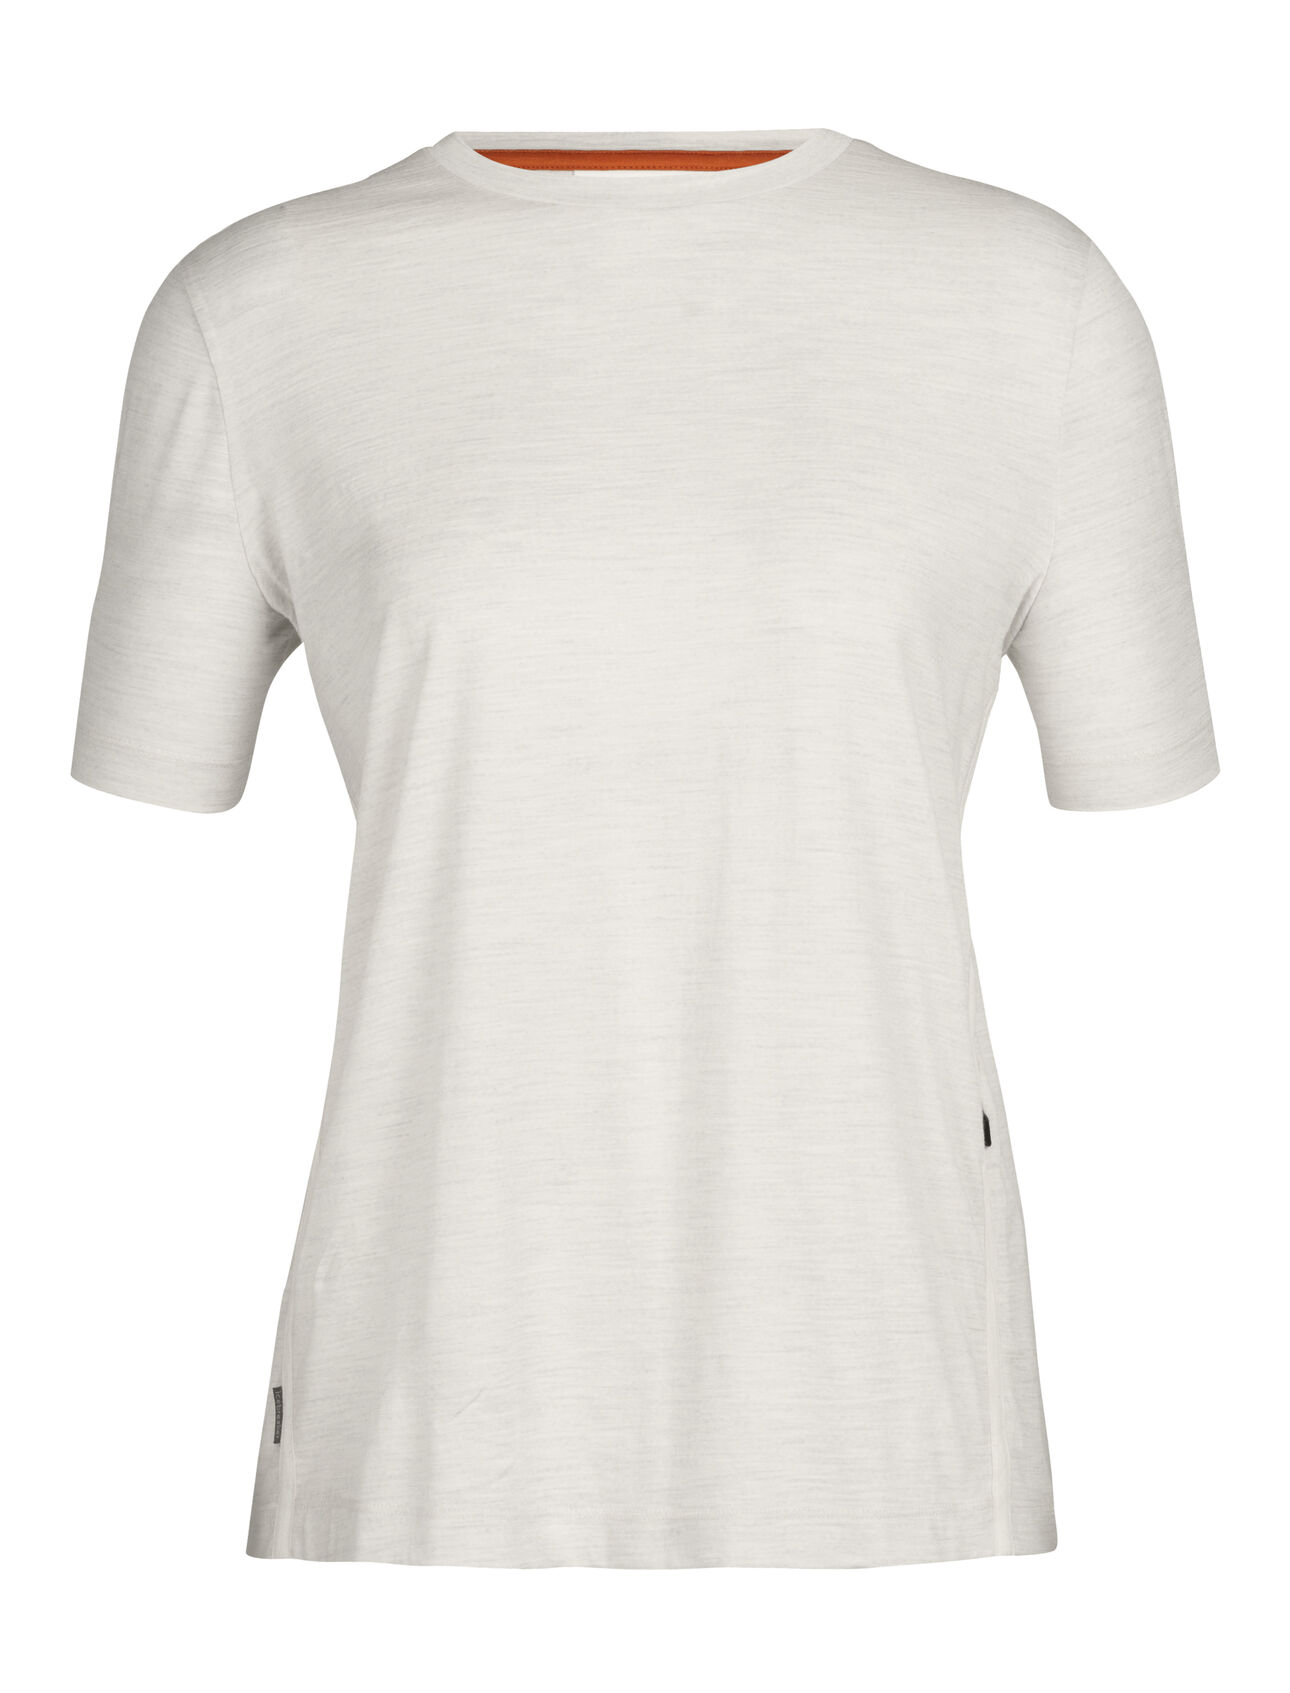 Womens Merino T-Shirt An incredibly versatile tee featuring soft, breathable, 100% merino jersey fabric, the Merino T-Shirt provides naturally breathable comfort on the move.